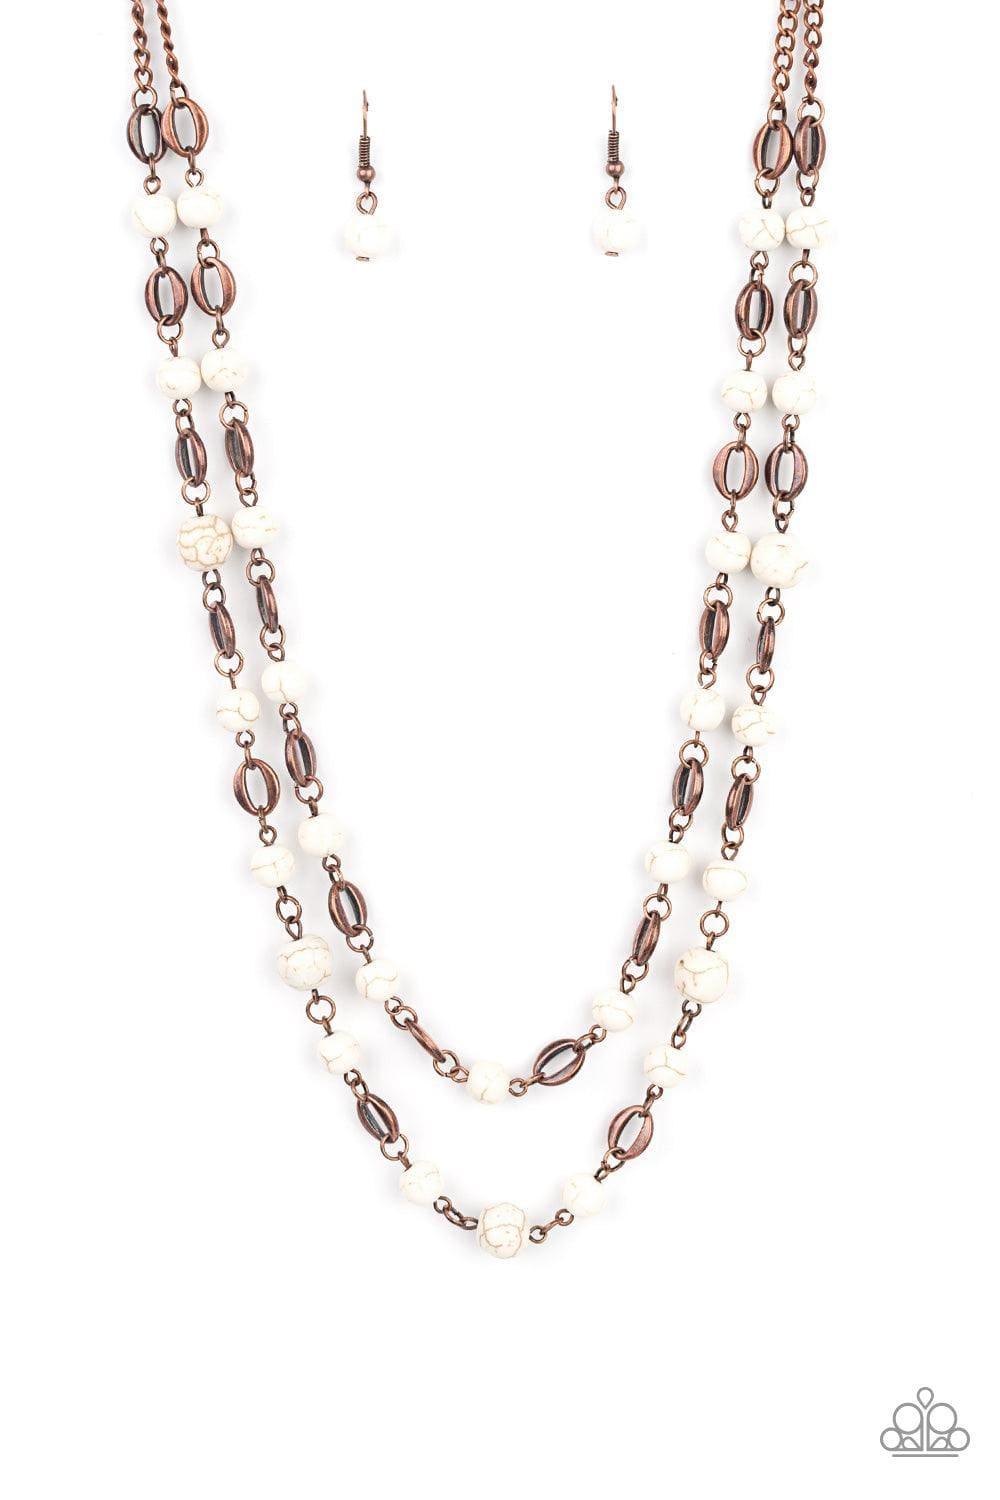 Paparazzi Accessories - Essentially Earthy - Copper Necklace - Bling by JessieK